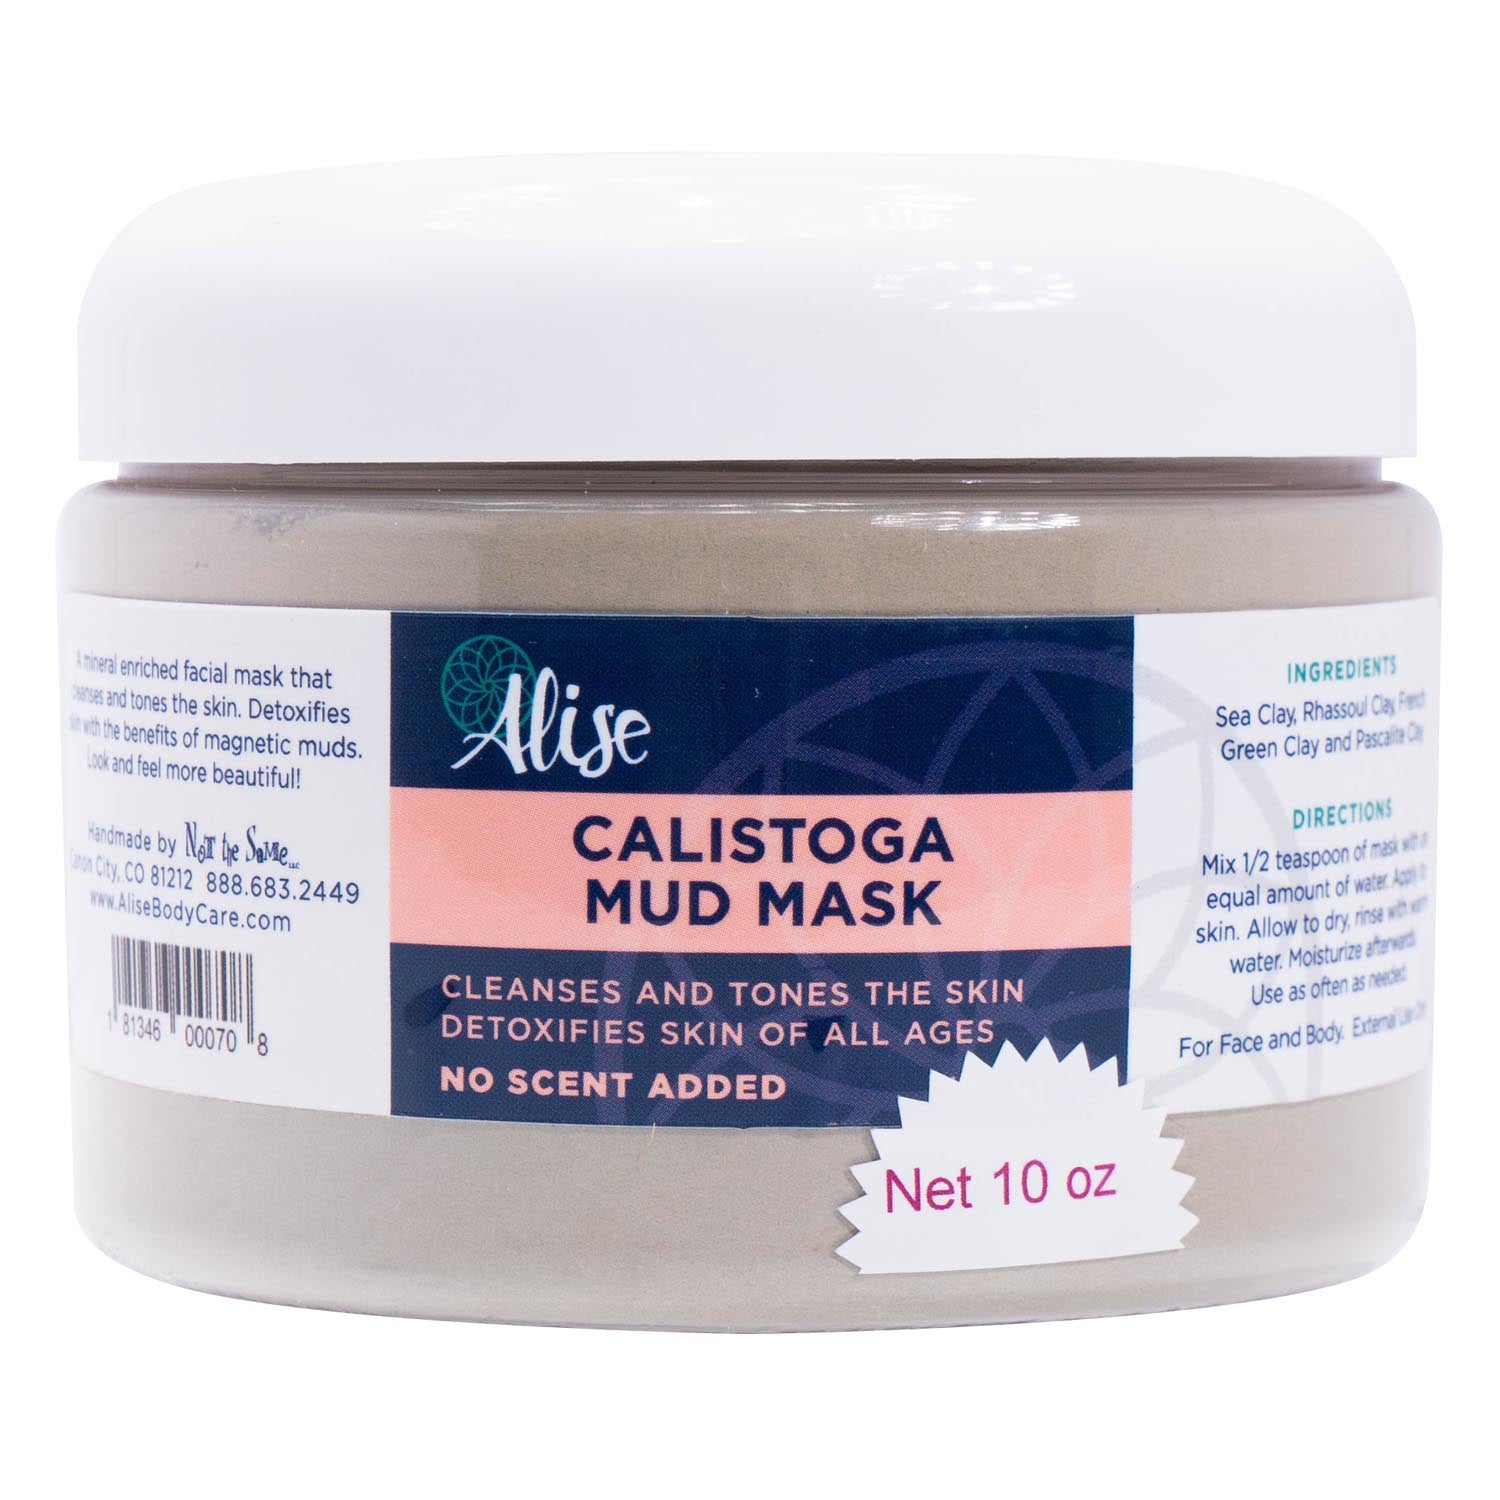 Calistoga Mud Mask 10oz handcrafted by Alise Body Care